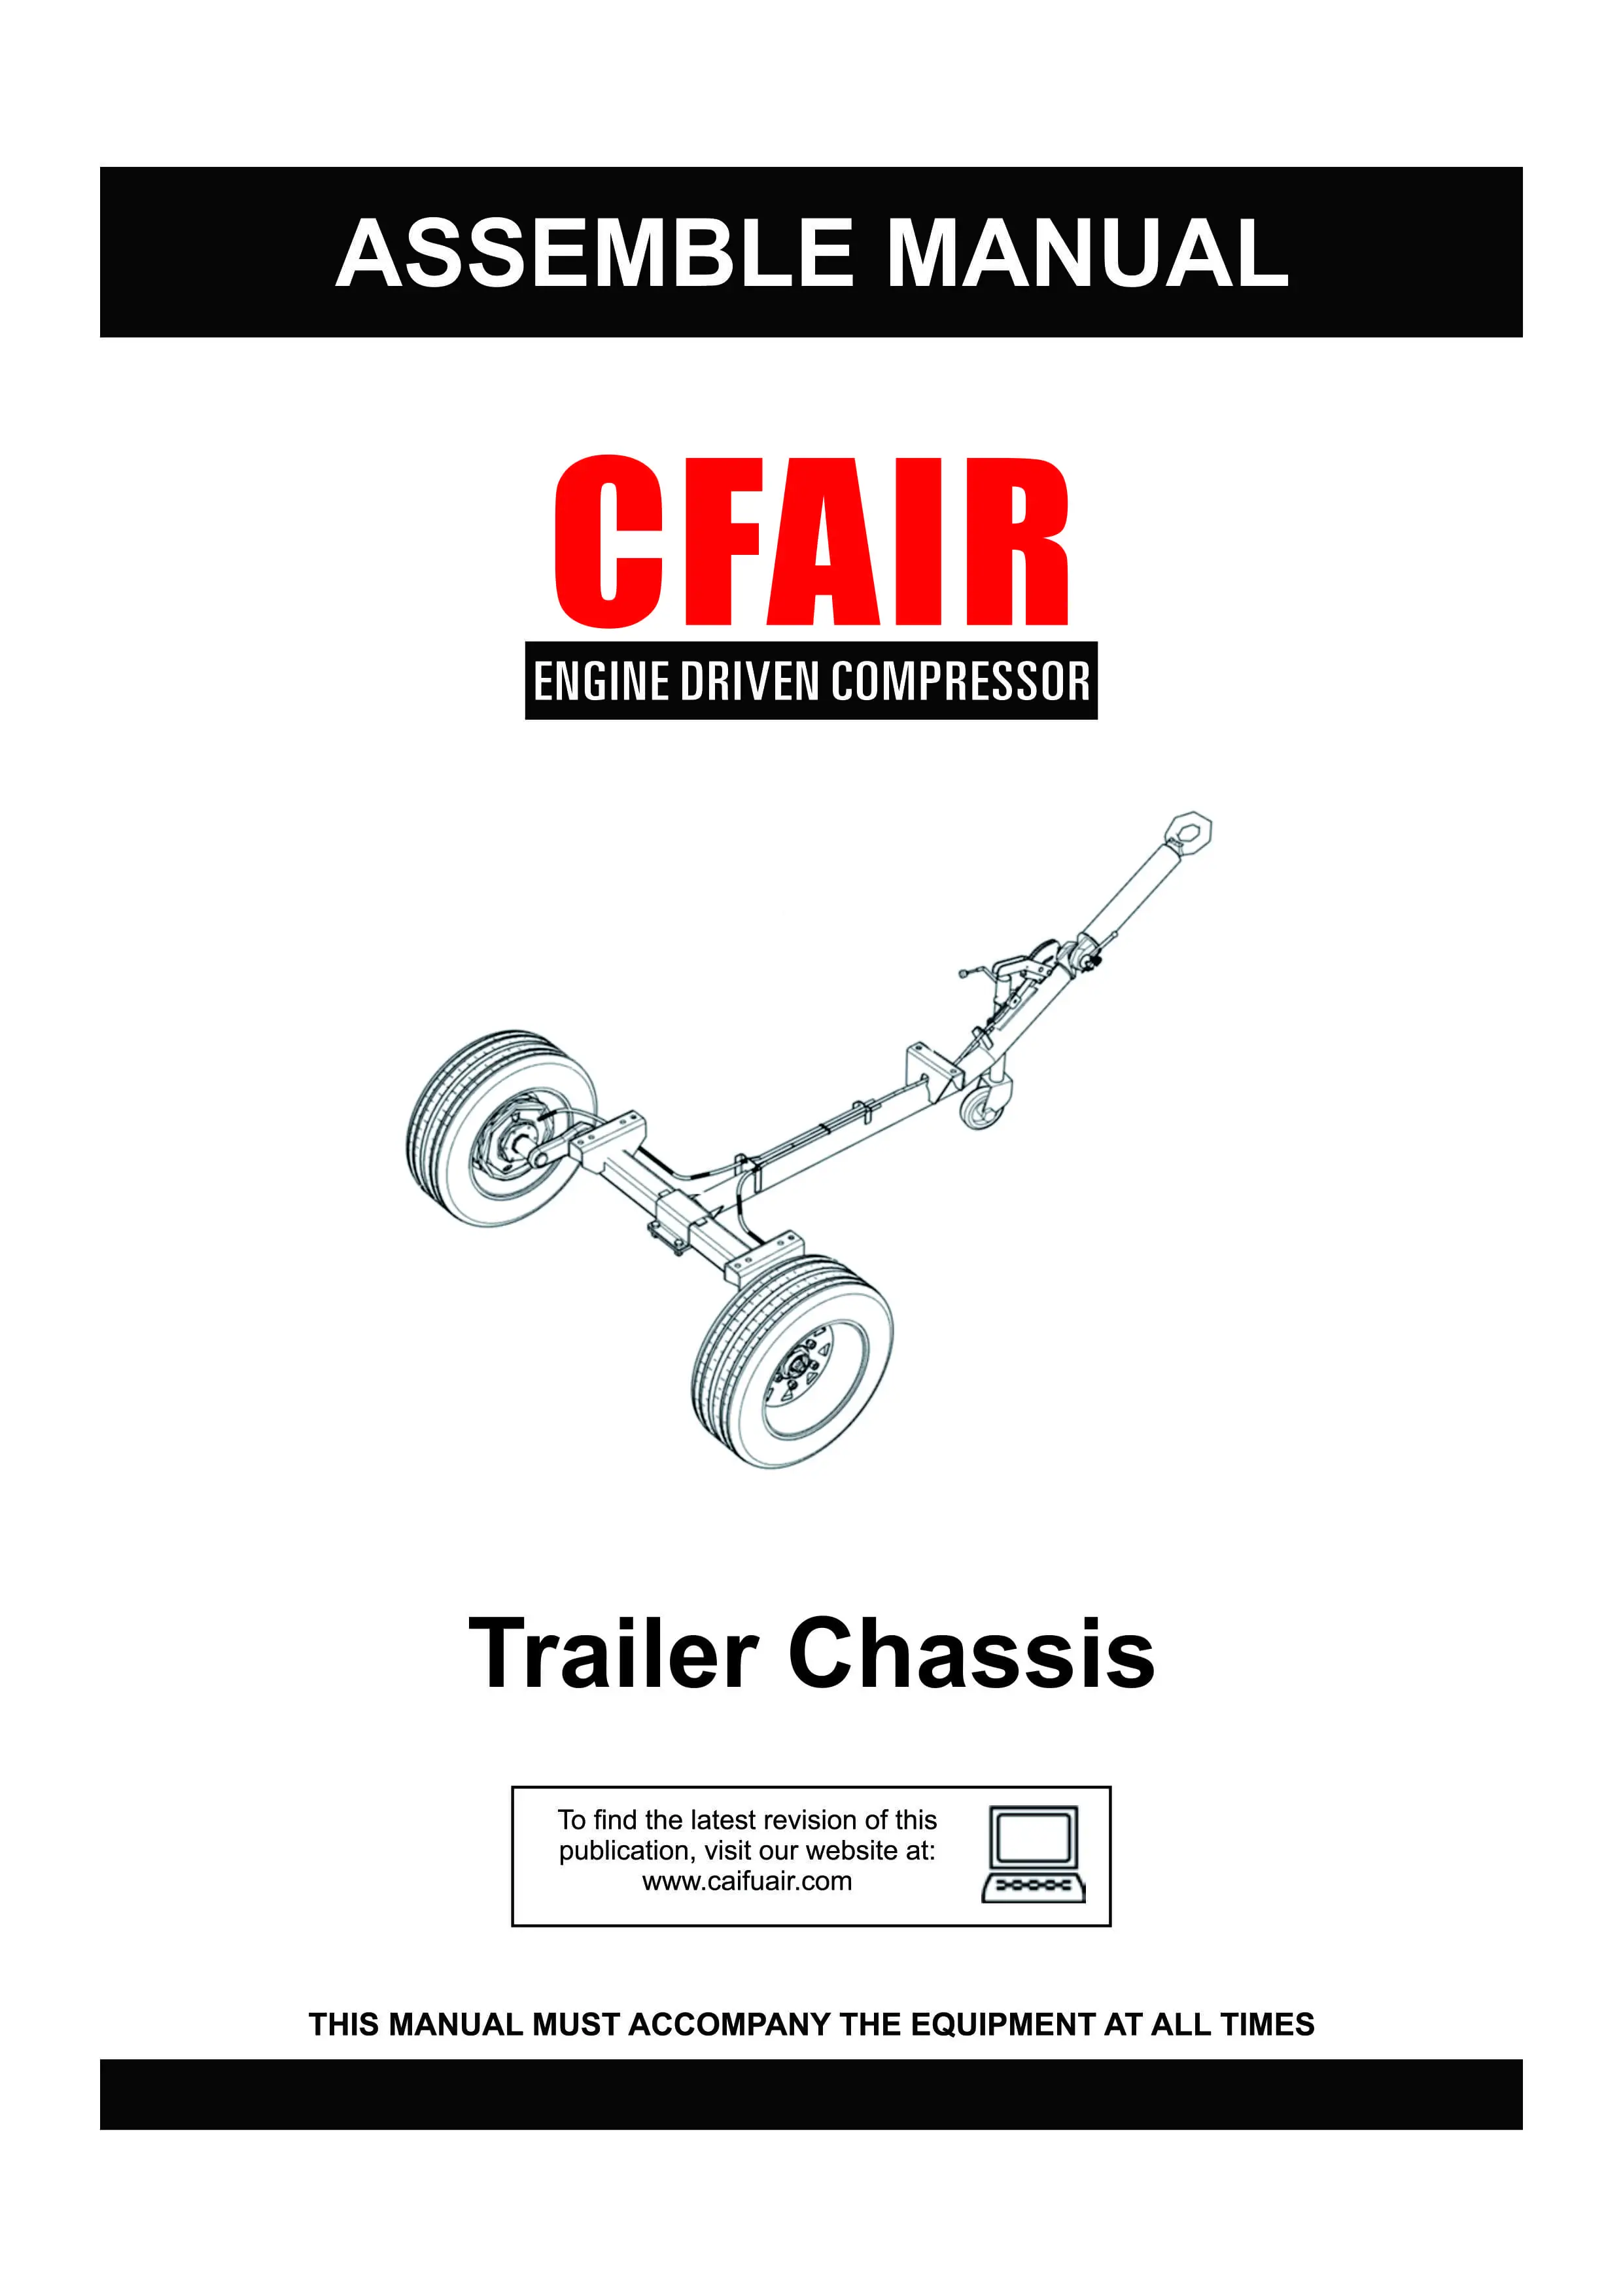 TRAILER CHASSIS ASSEMBLE MANUAL